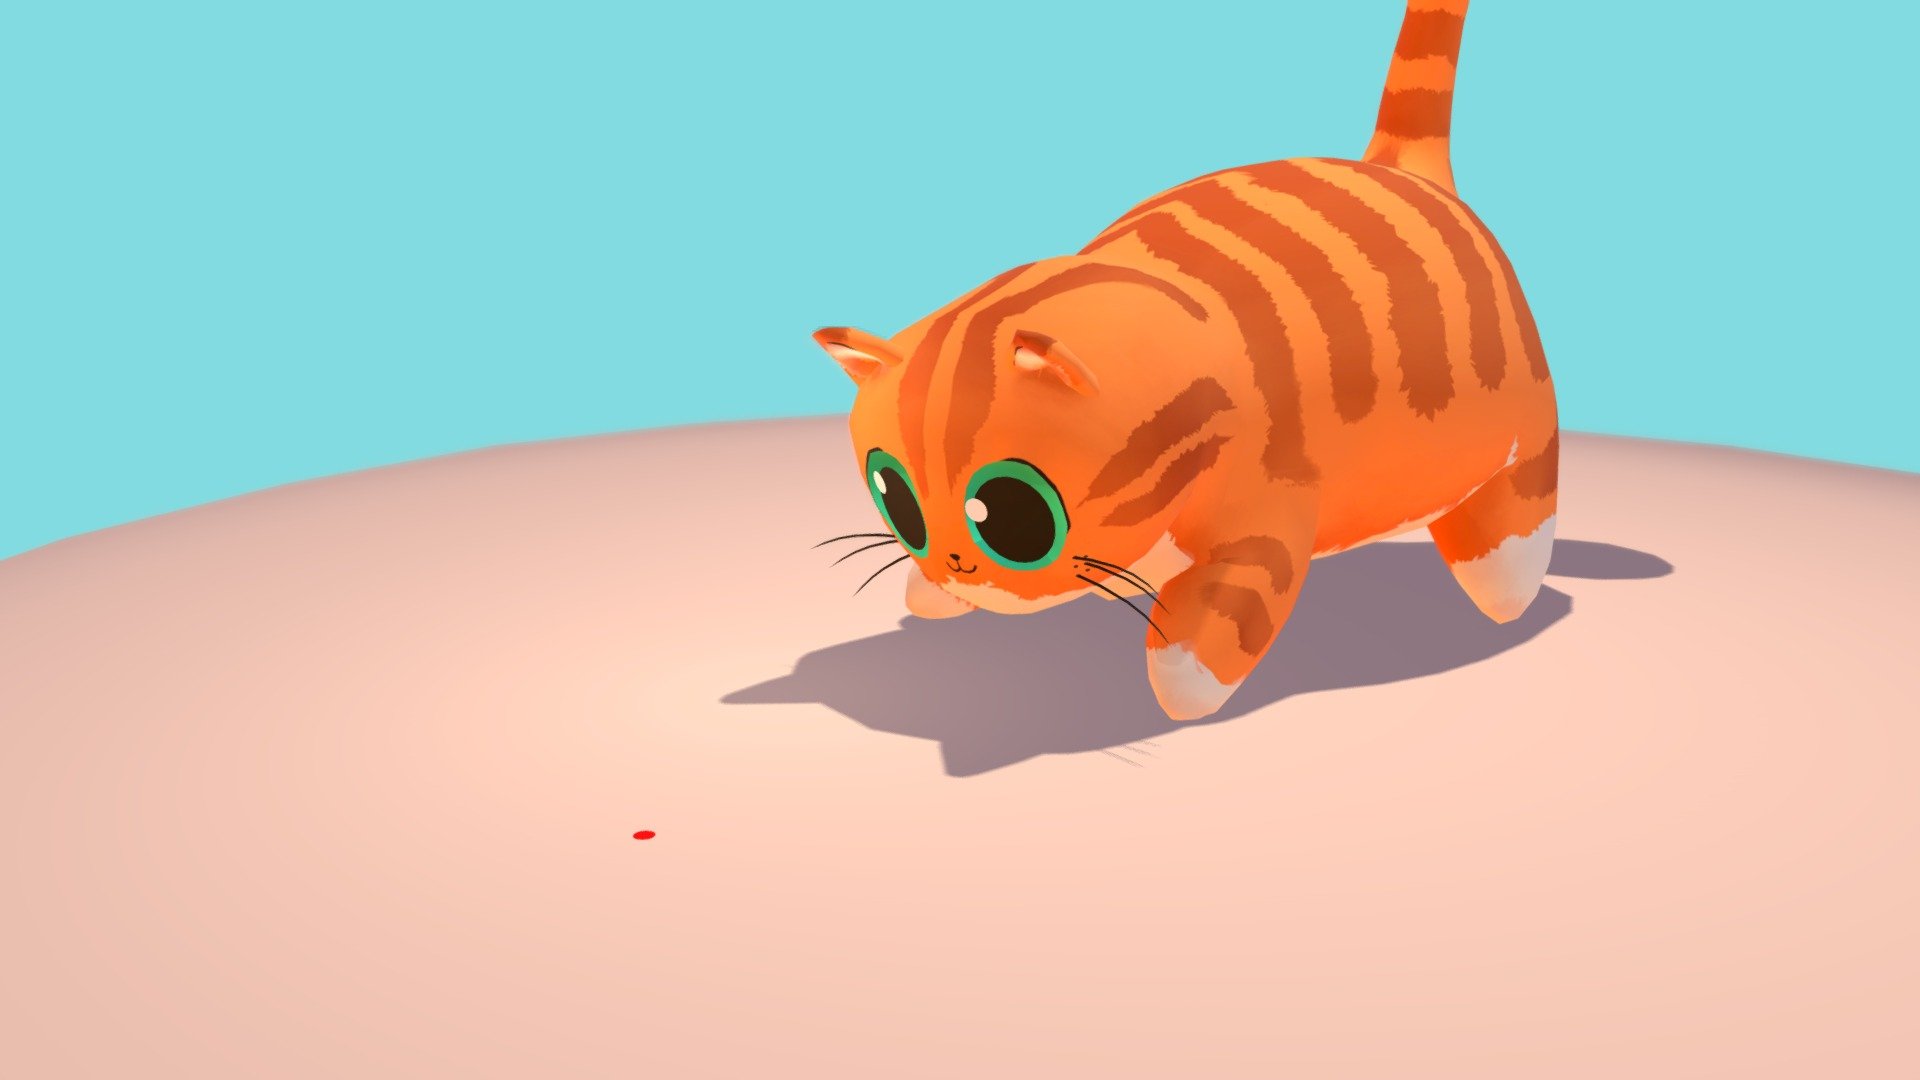 Here we have a big cat in its natural habitat, the living room. 
Normally it just hunts pray like toy mice, yarn balls, and leftovers on the kitchen counter. 
But today we see this urban cat hunt its famed enemy, the laser pointer! - |Orange Cat| - 3D model by GlennValke (@GlennValkePro) 3d model